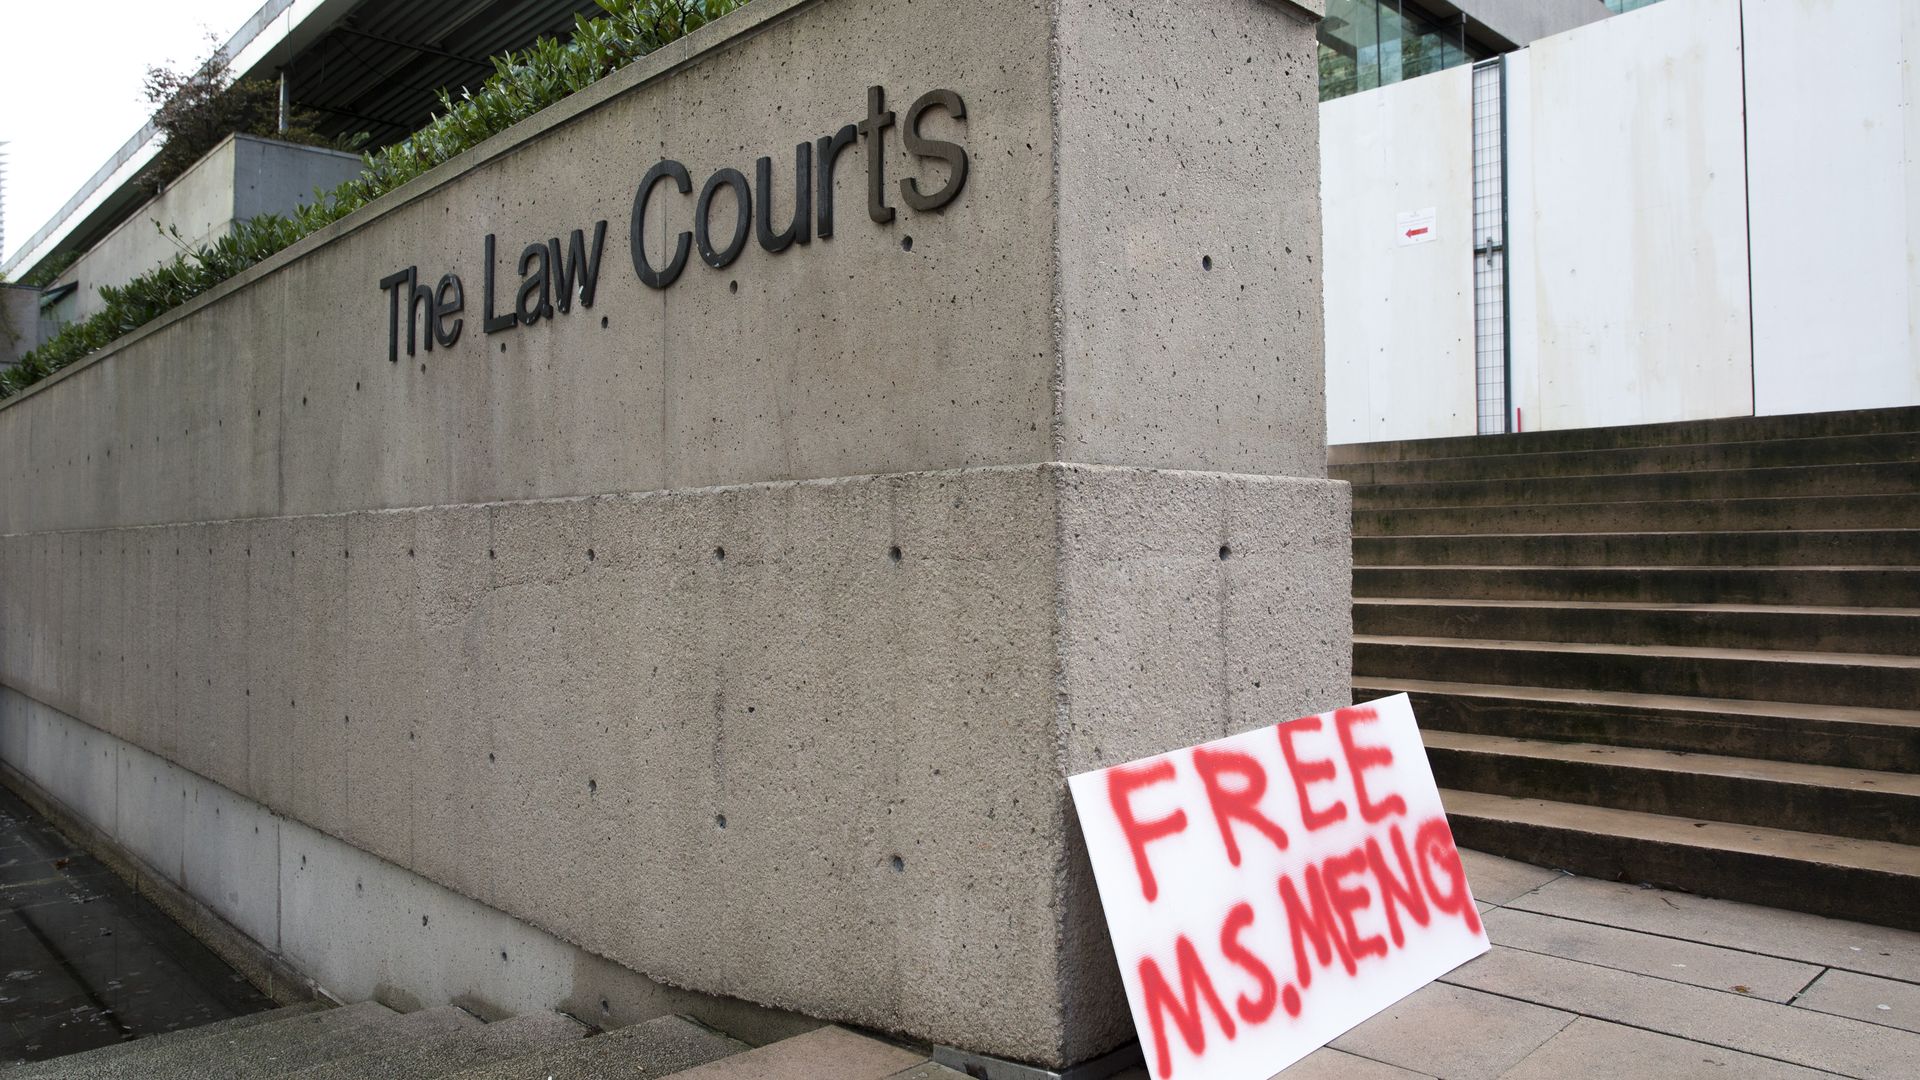 A sign calling for the release of Huawei Technologies Chief Financial Officer Meng Wanzhou is seen outside at British Columbia Superior Courts following her December 1 arrest in Canada 